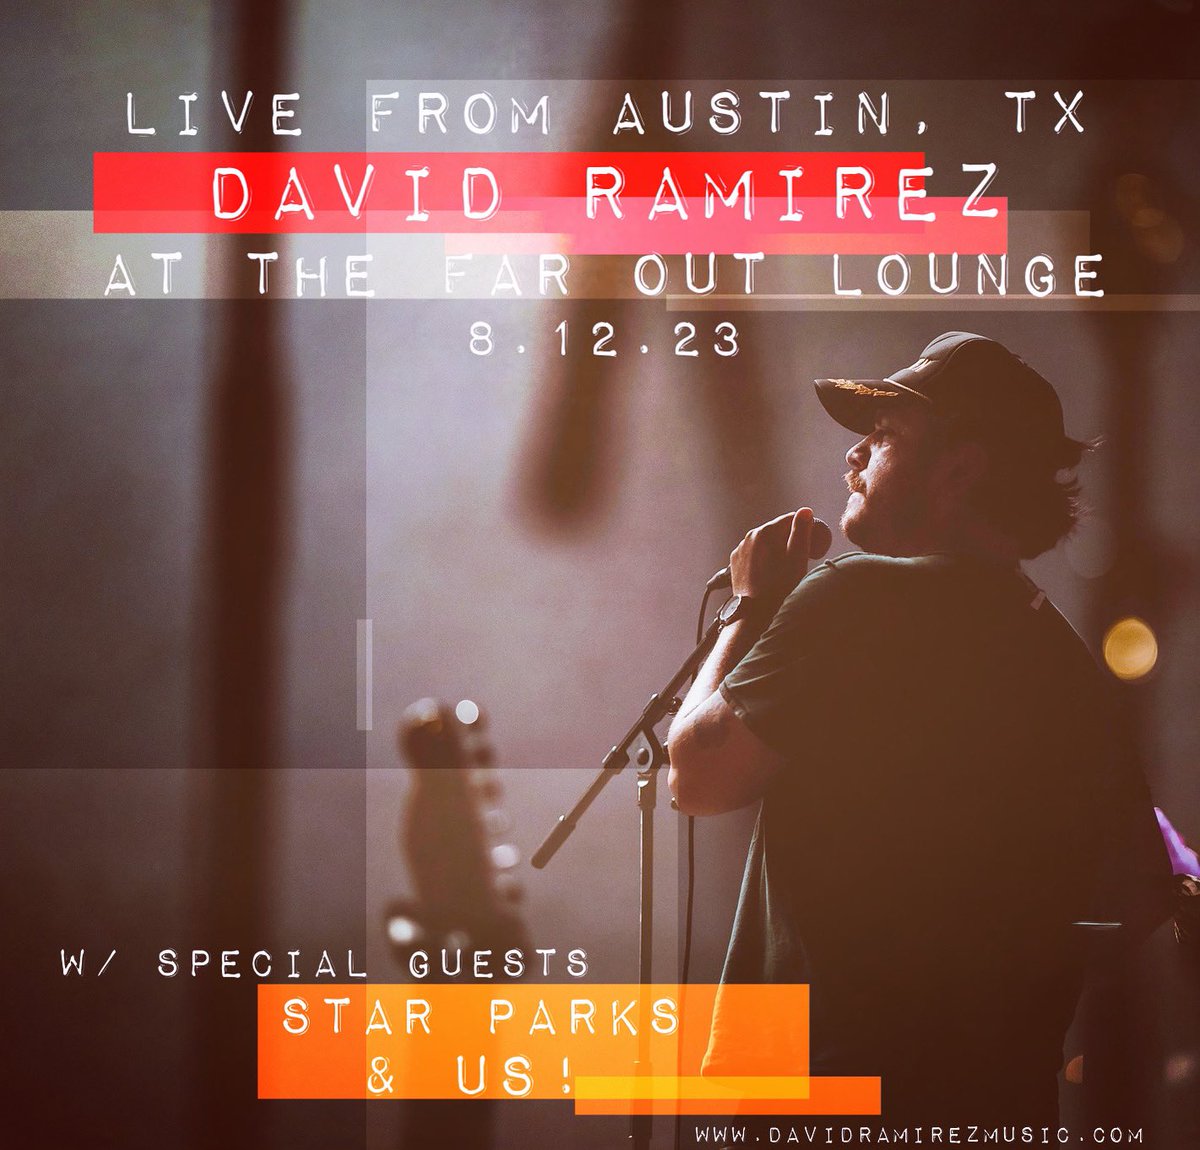 On August 12th, at The Far Out Lounge here in Austin, TX, a six piece band and I will be recording my live album. For our set, I’ve selected 35 songs from my five full length’s and three EP’s. Over 15 years of music and stories recorded in one night in front of a live audience.